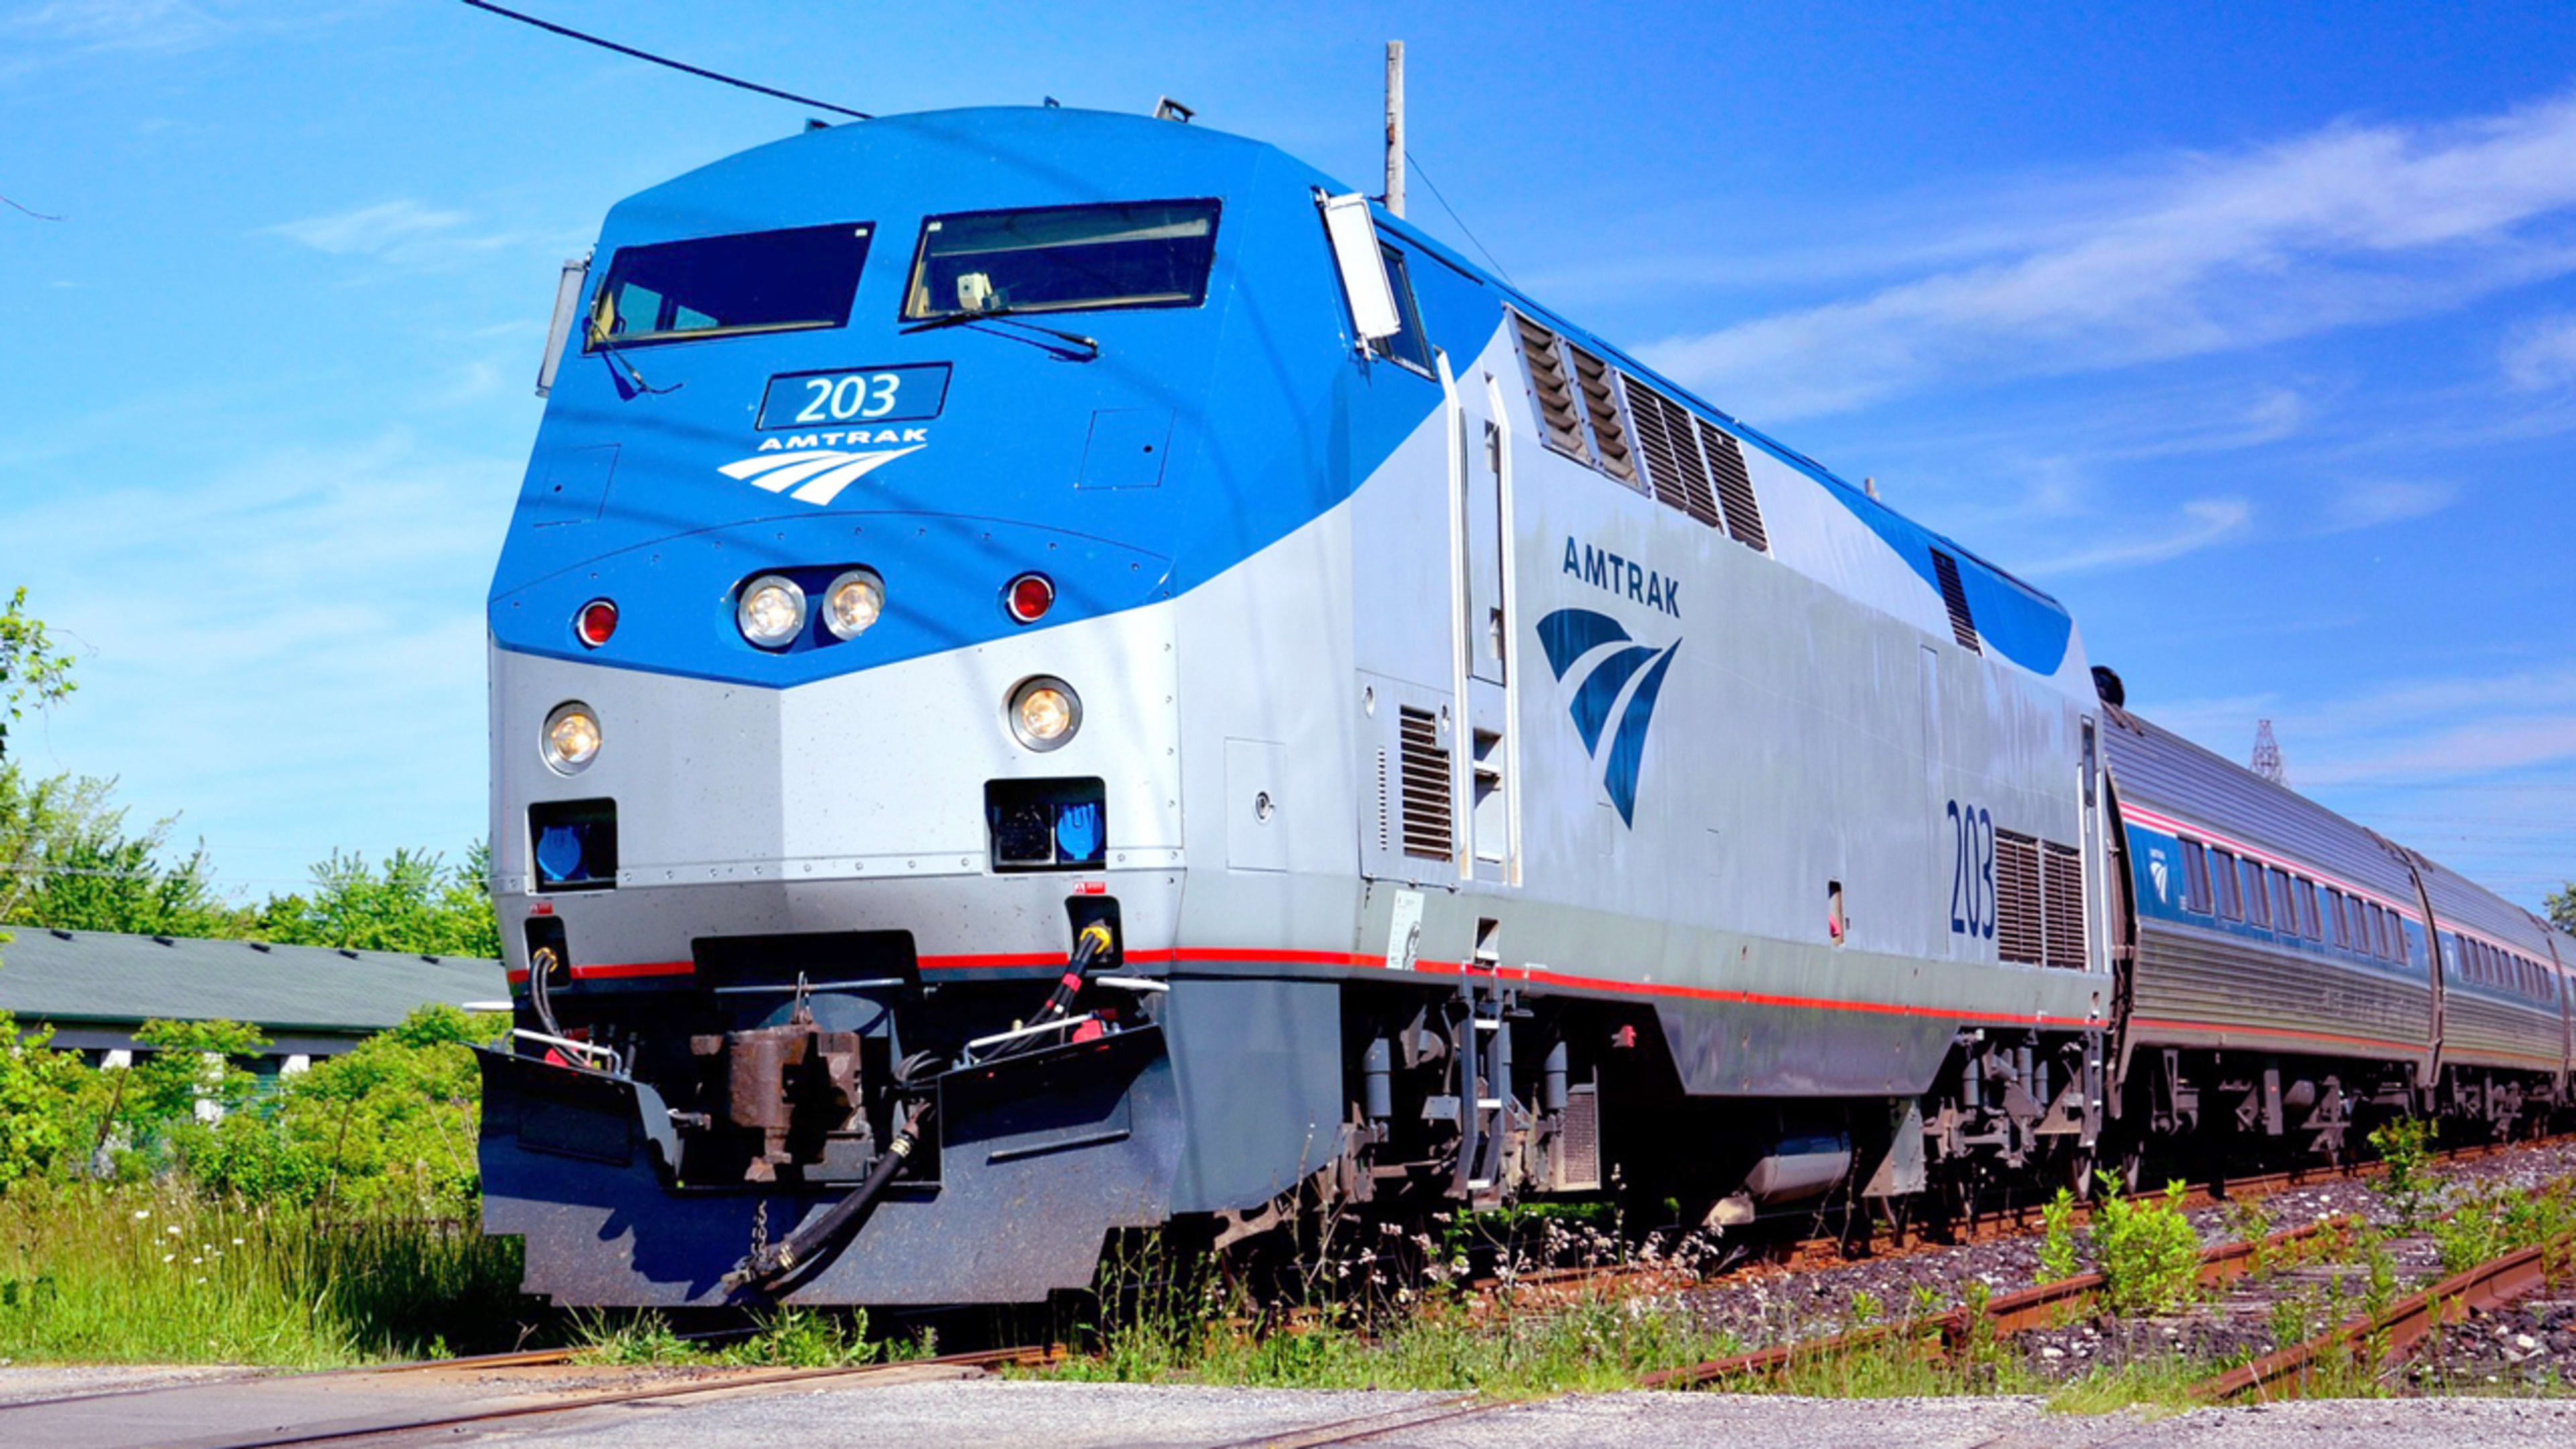 Amtrak is swapping dining cars on some trains for “airplane food”